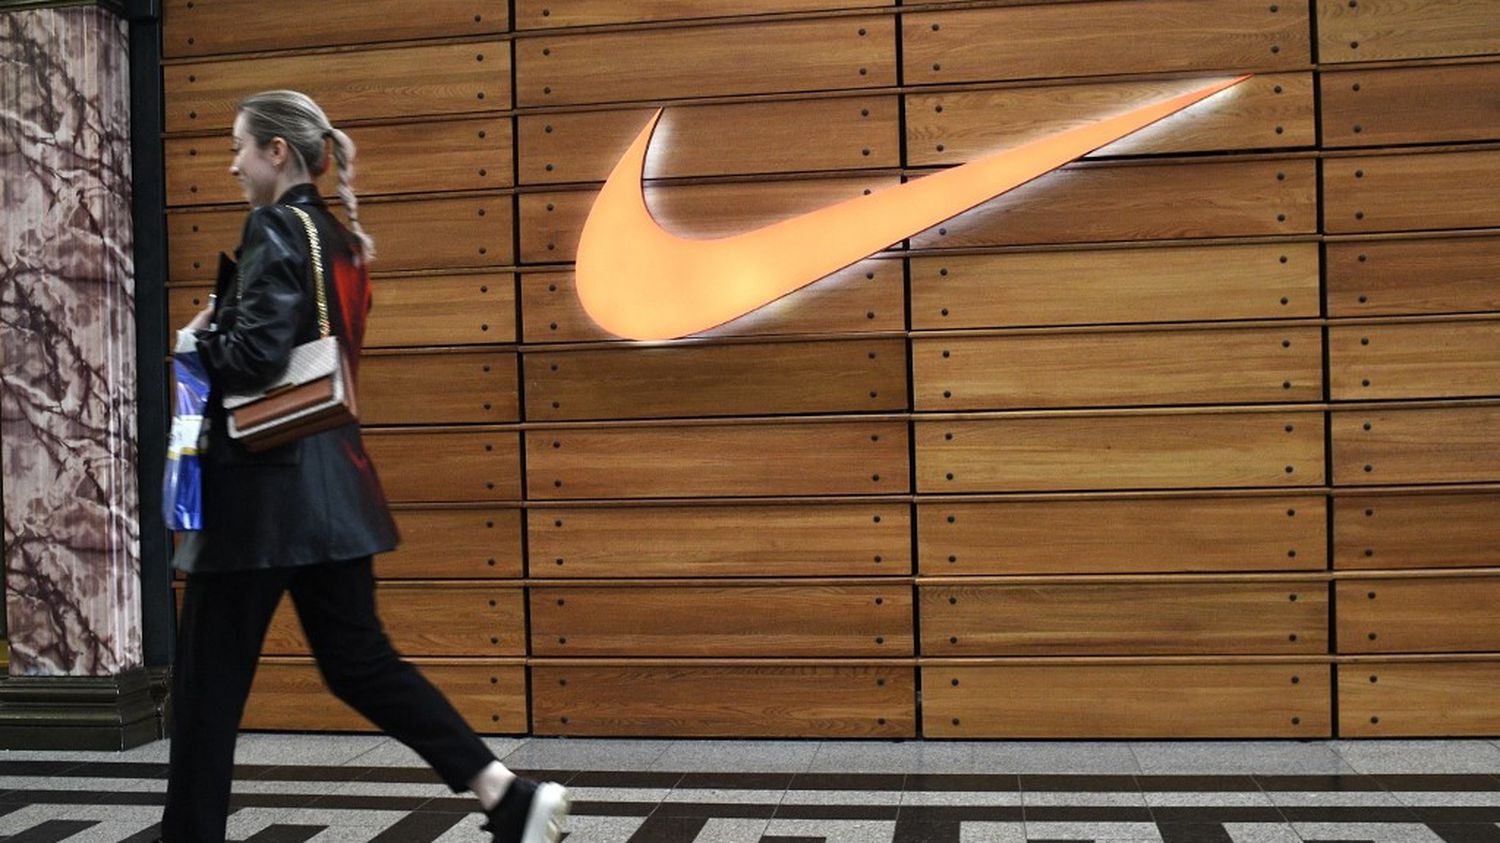 Nike leaves the Russian market for good and will not reopen its stores
